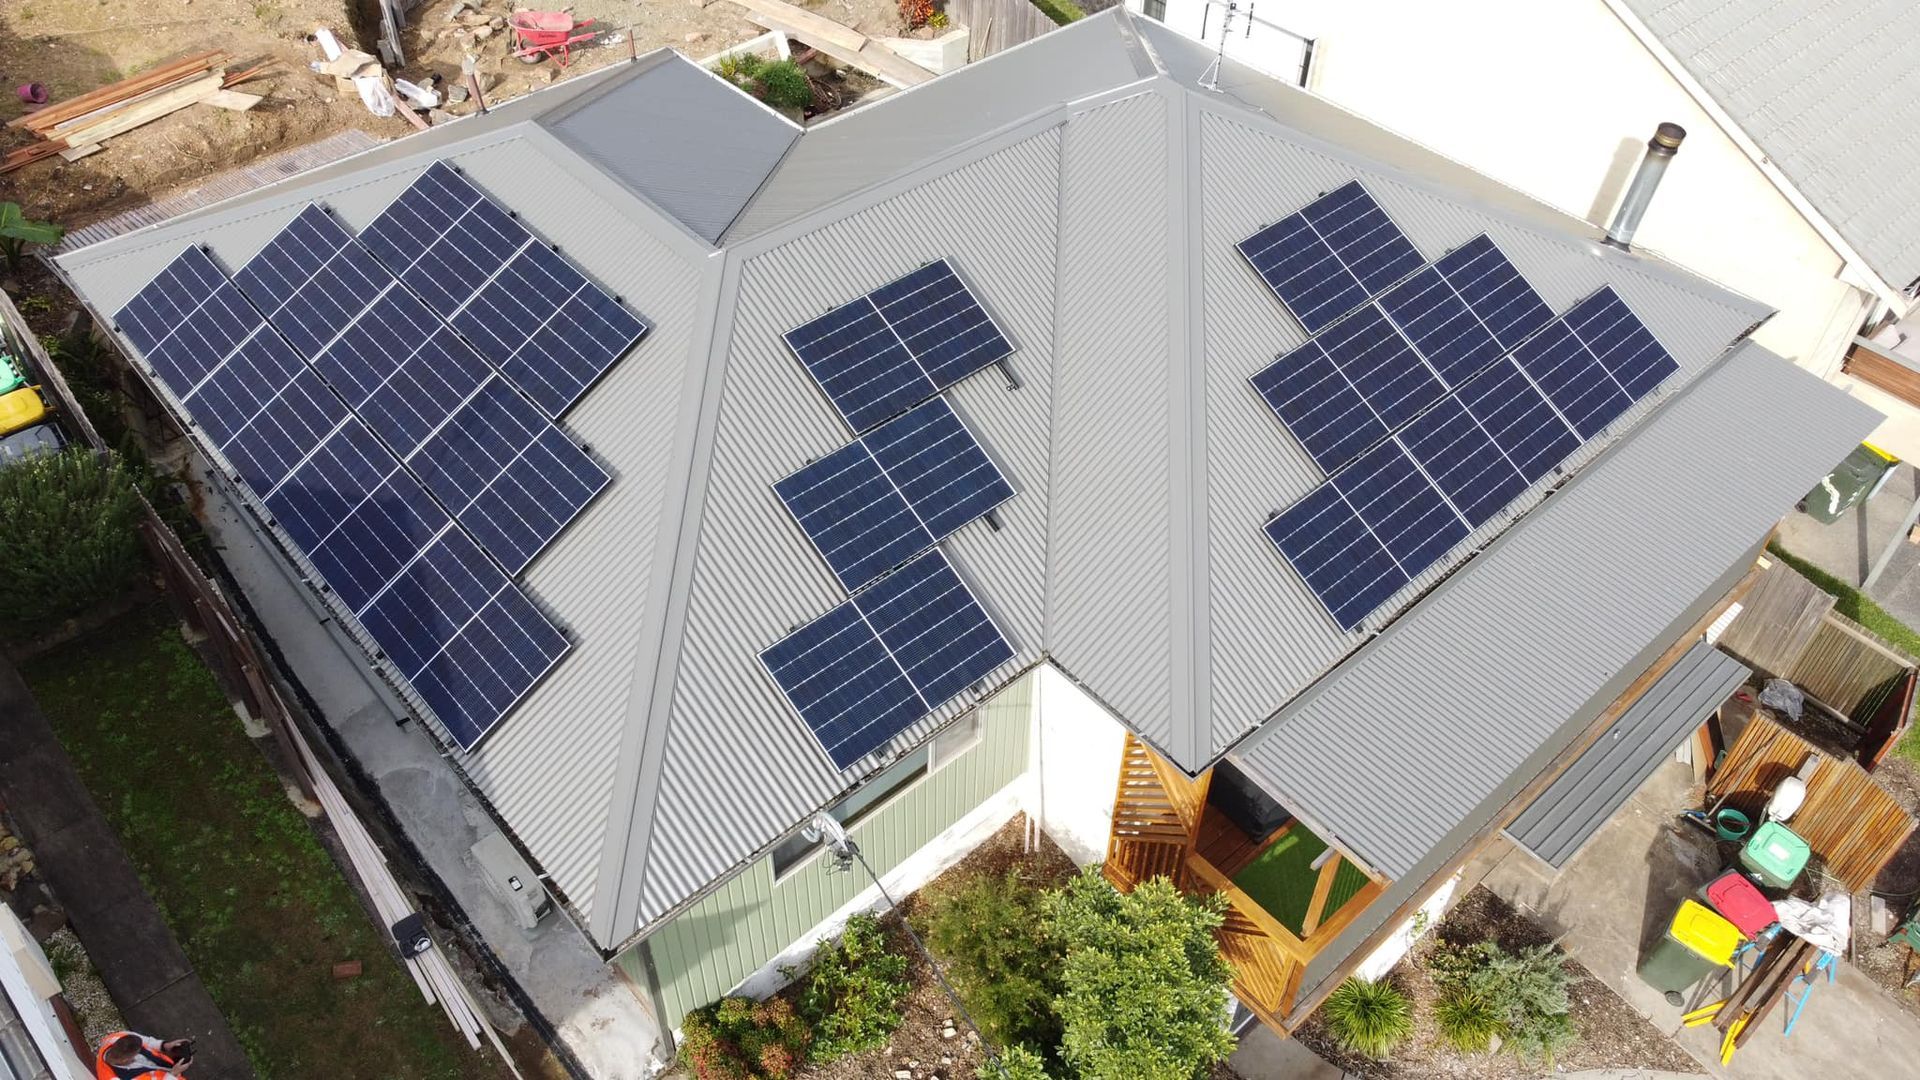 Solar panels installed on the large house.— Level 2 Electrician in Port Stephens NSW